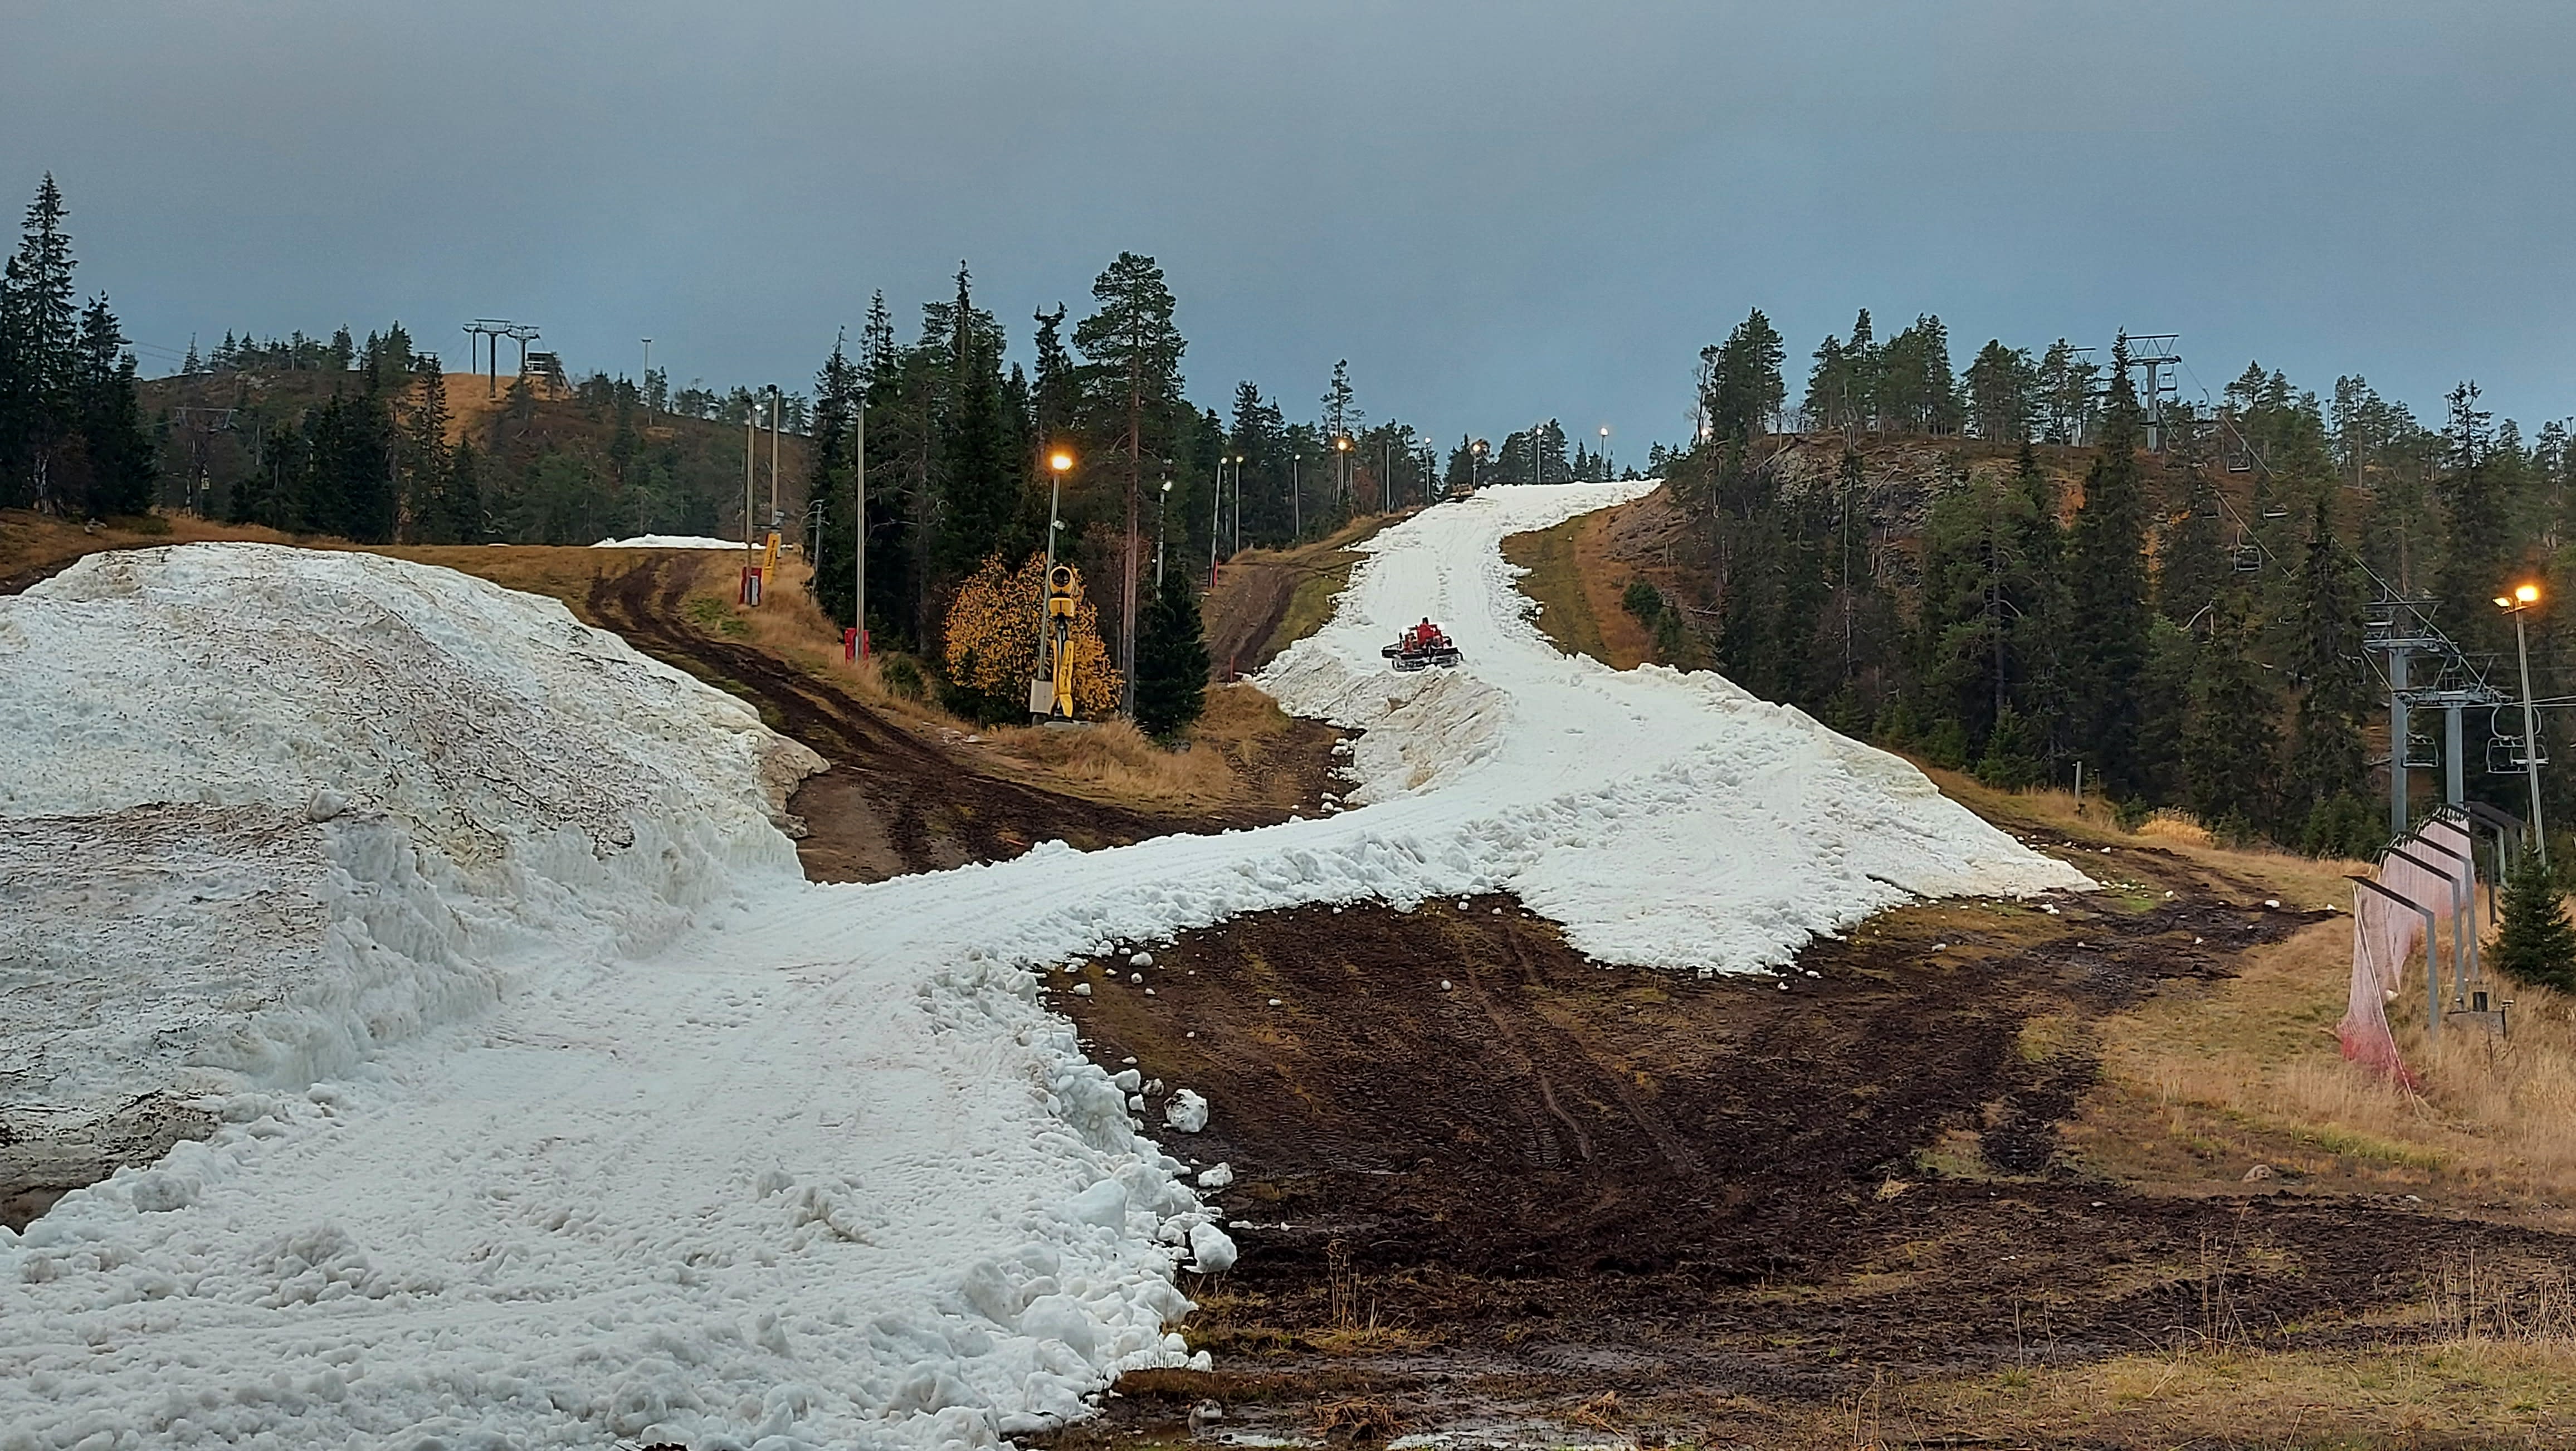 Snow recycling in Lapland for October skiers